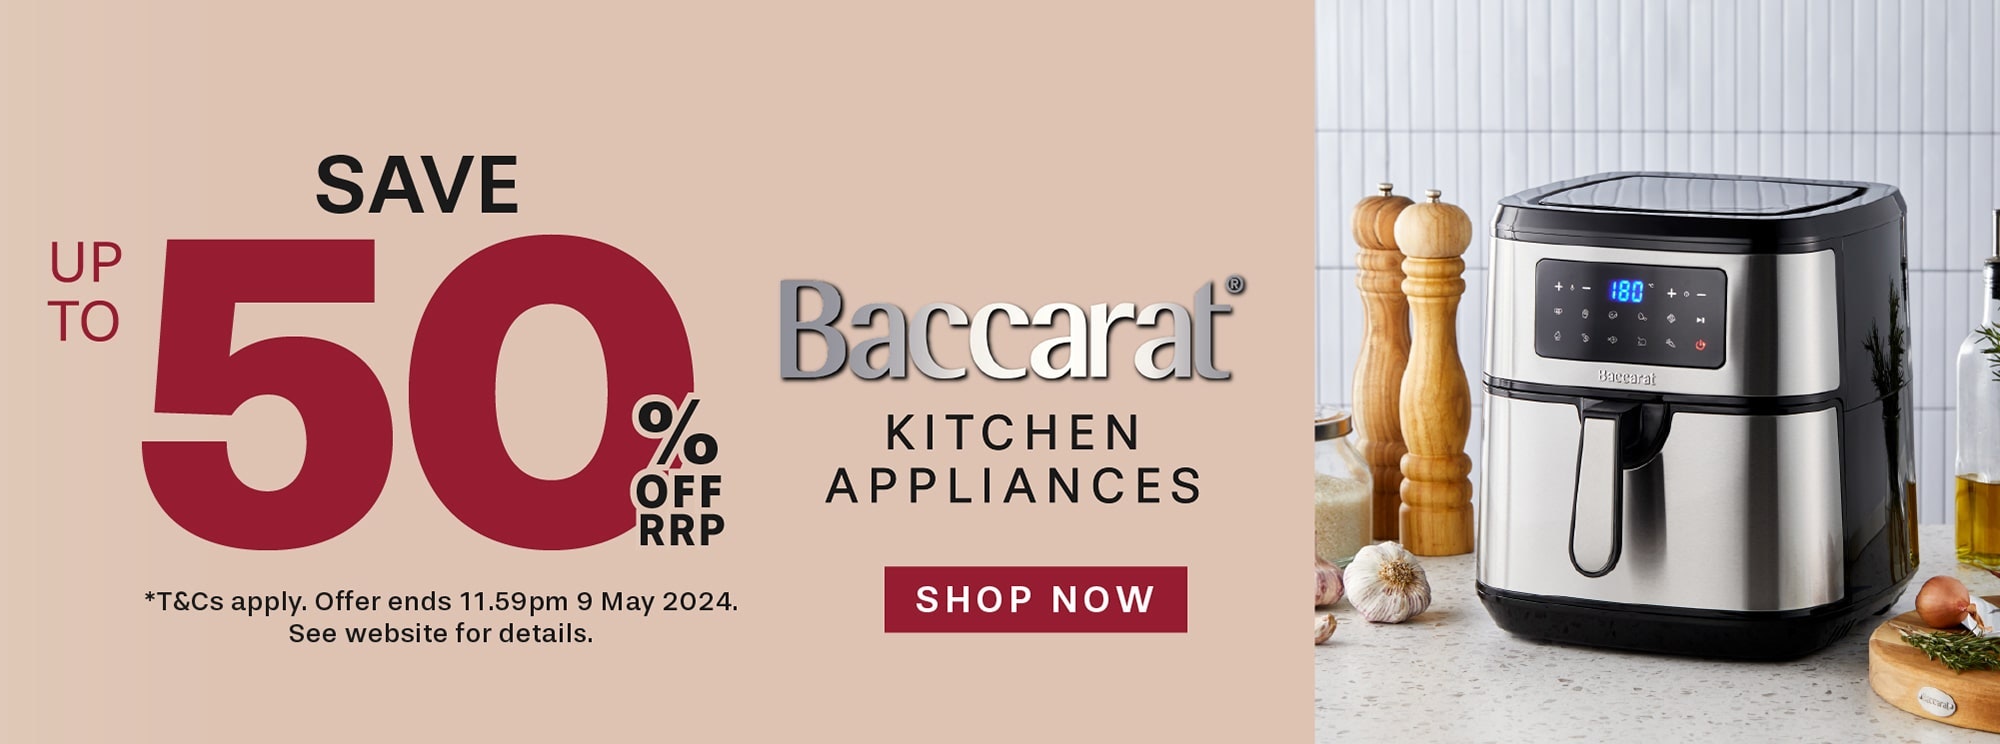 Save up to 50% Off Kitchen Appliances